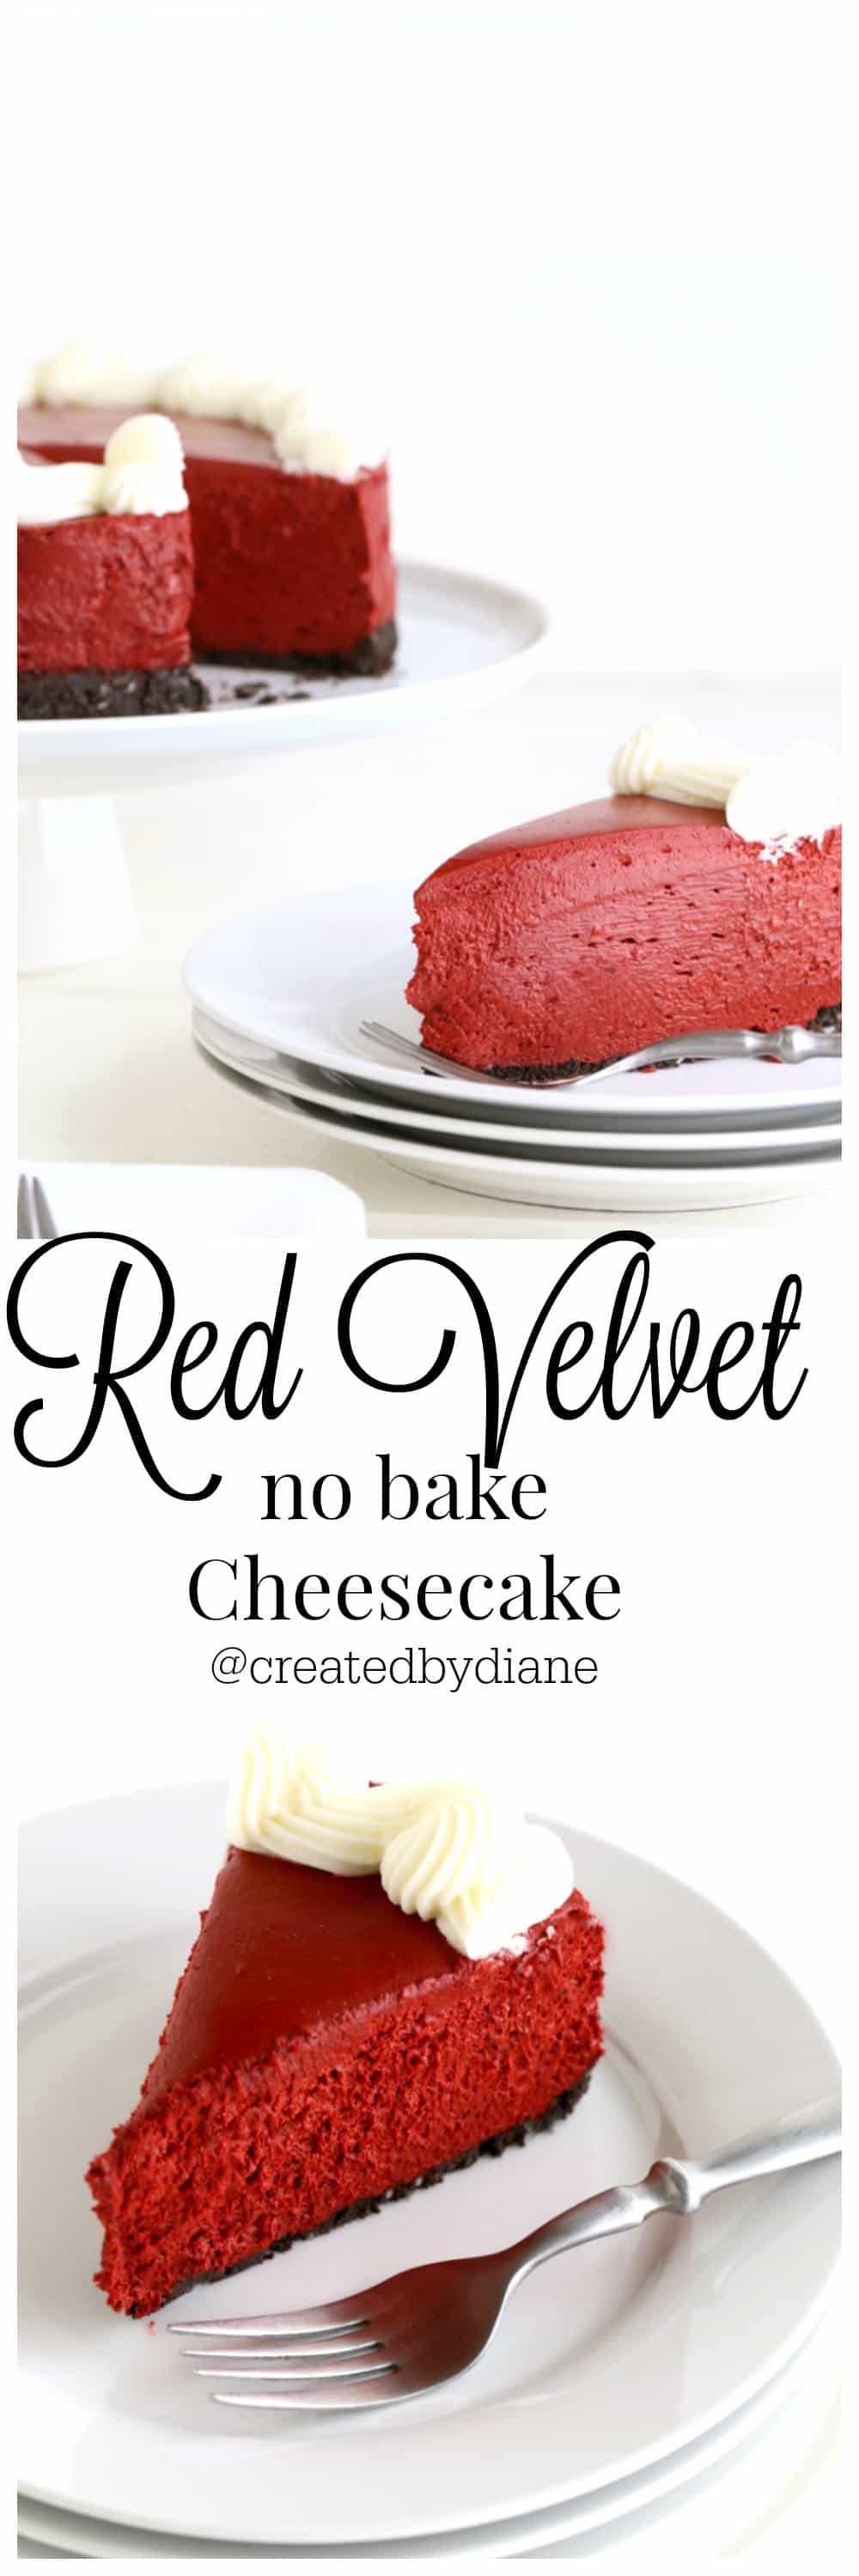 Red Velvet no bake Cheesecake | Created by Diane